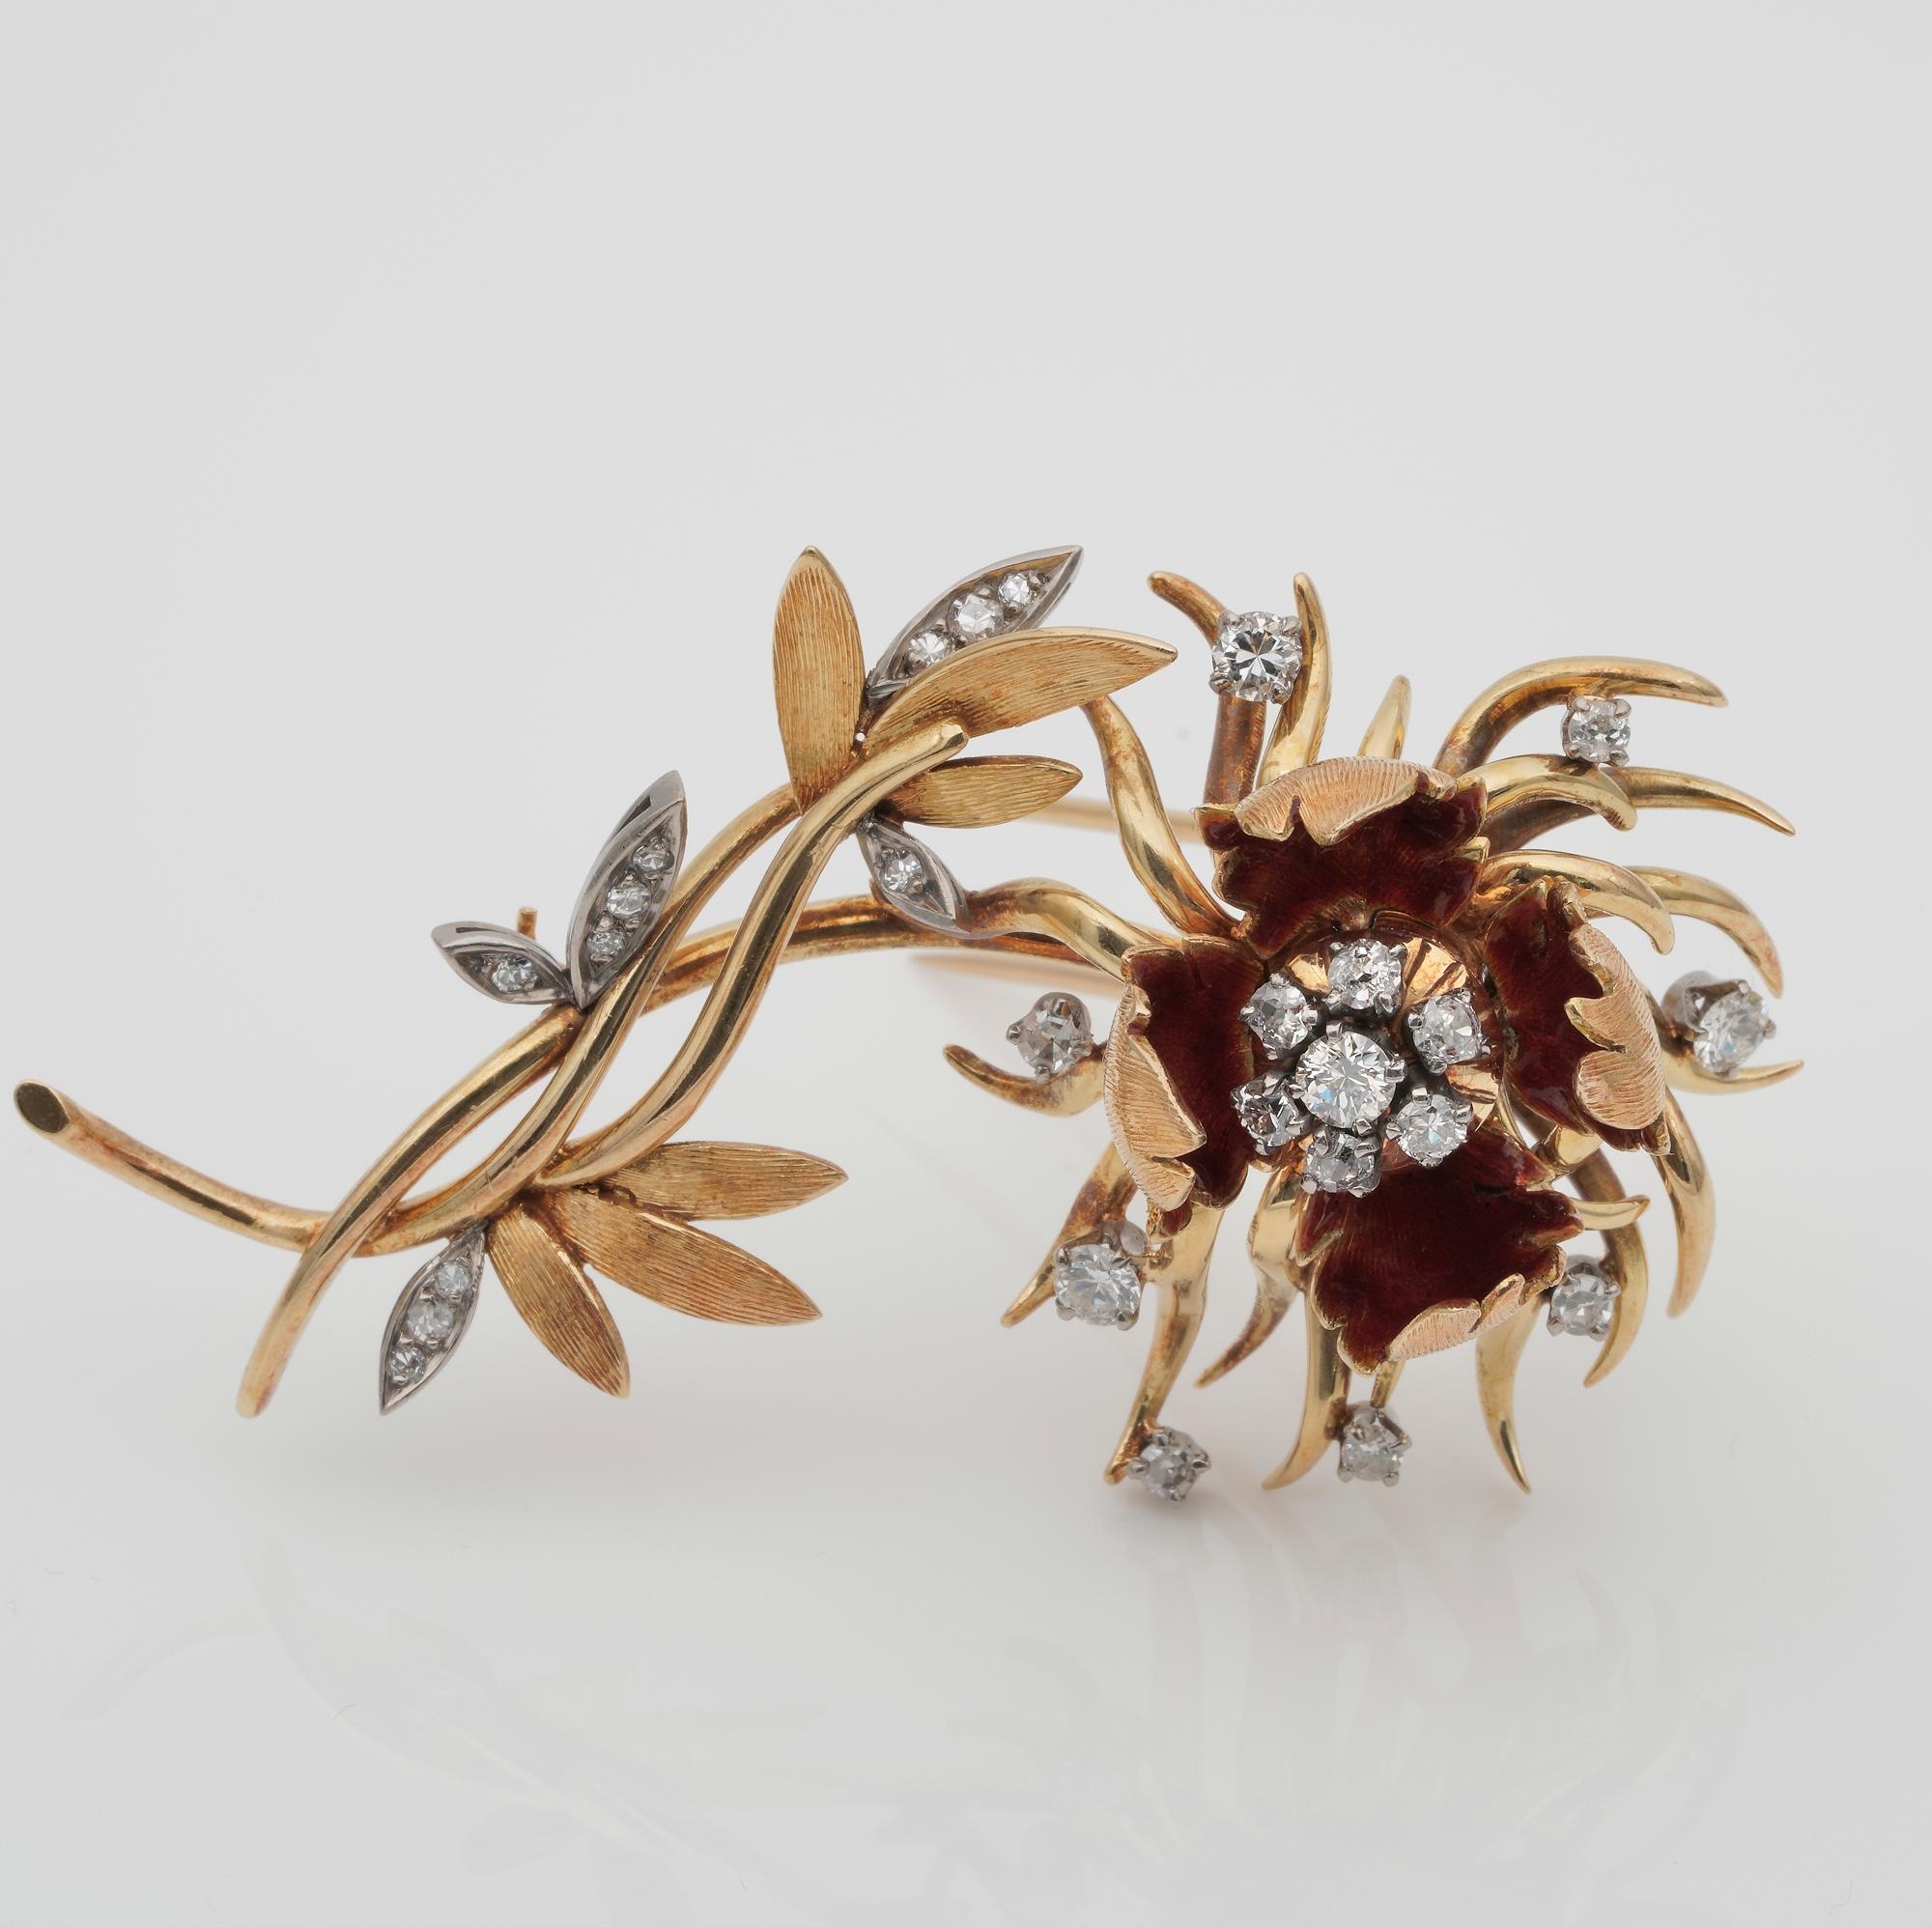 A unique example of Retro Diamond Flower brooch, hand crafted of solid 18 KT gold, marked
Designed as marvellous flower leaf spray nature inspired, artful made in a realistic tridimensional work and peculiarity of petals that can open or close to